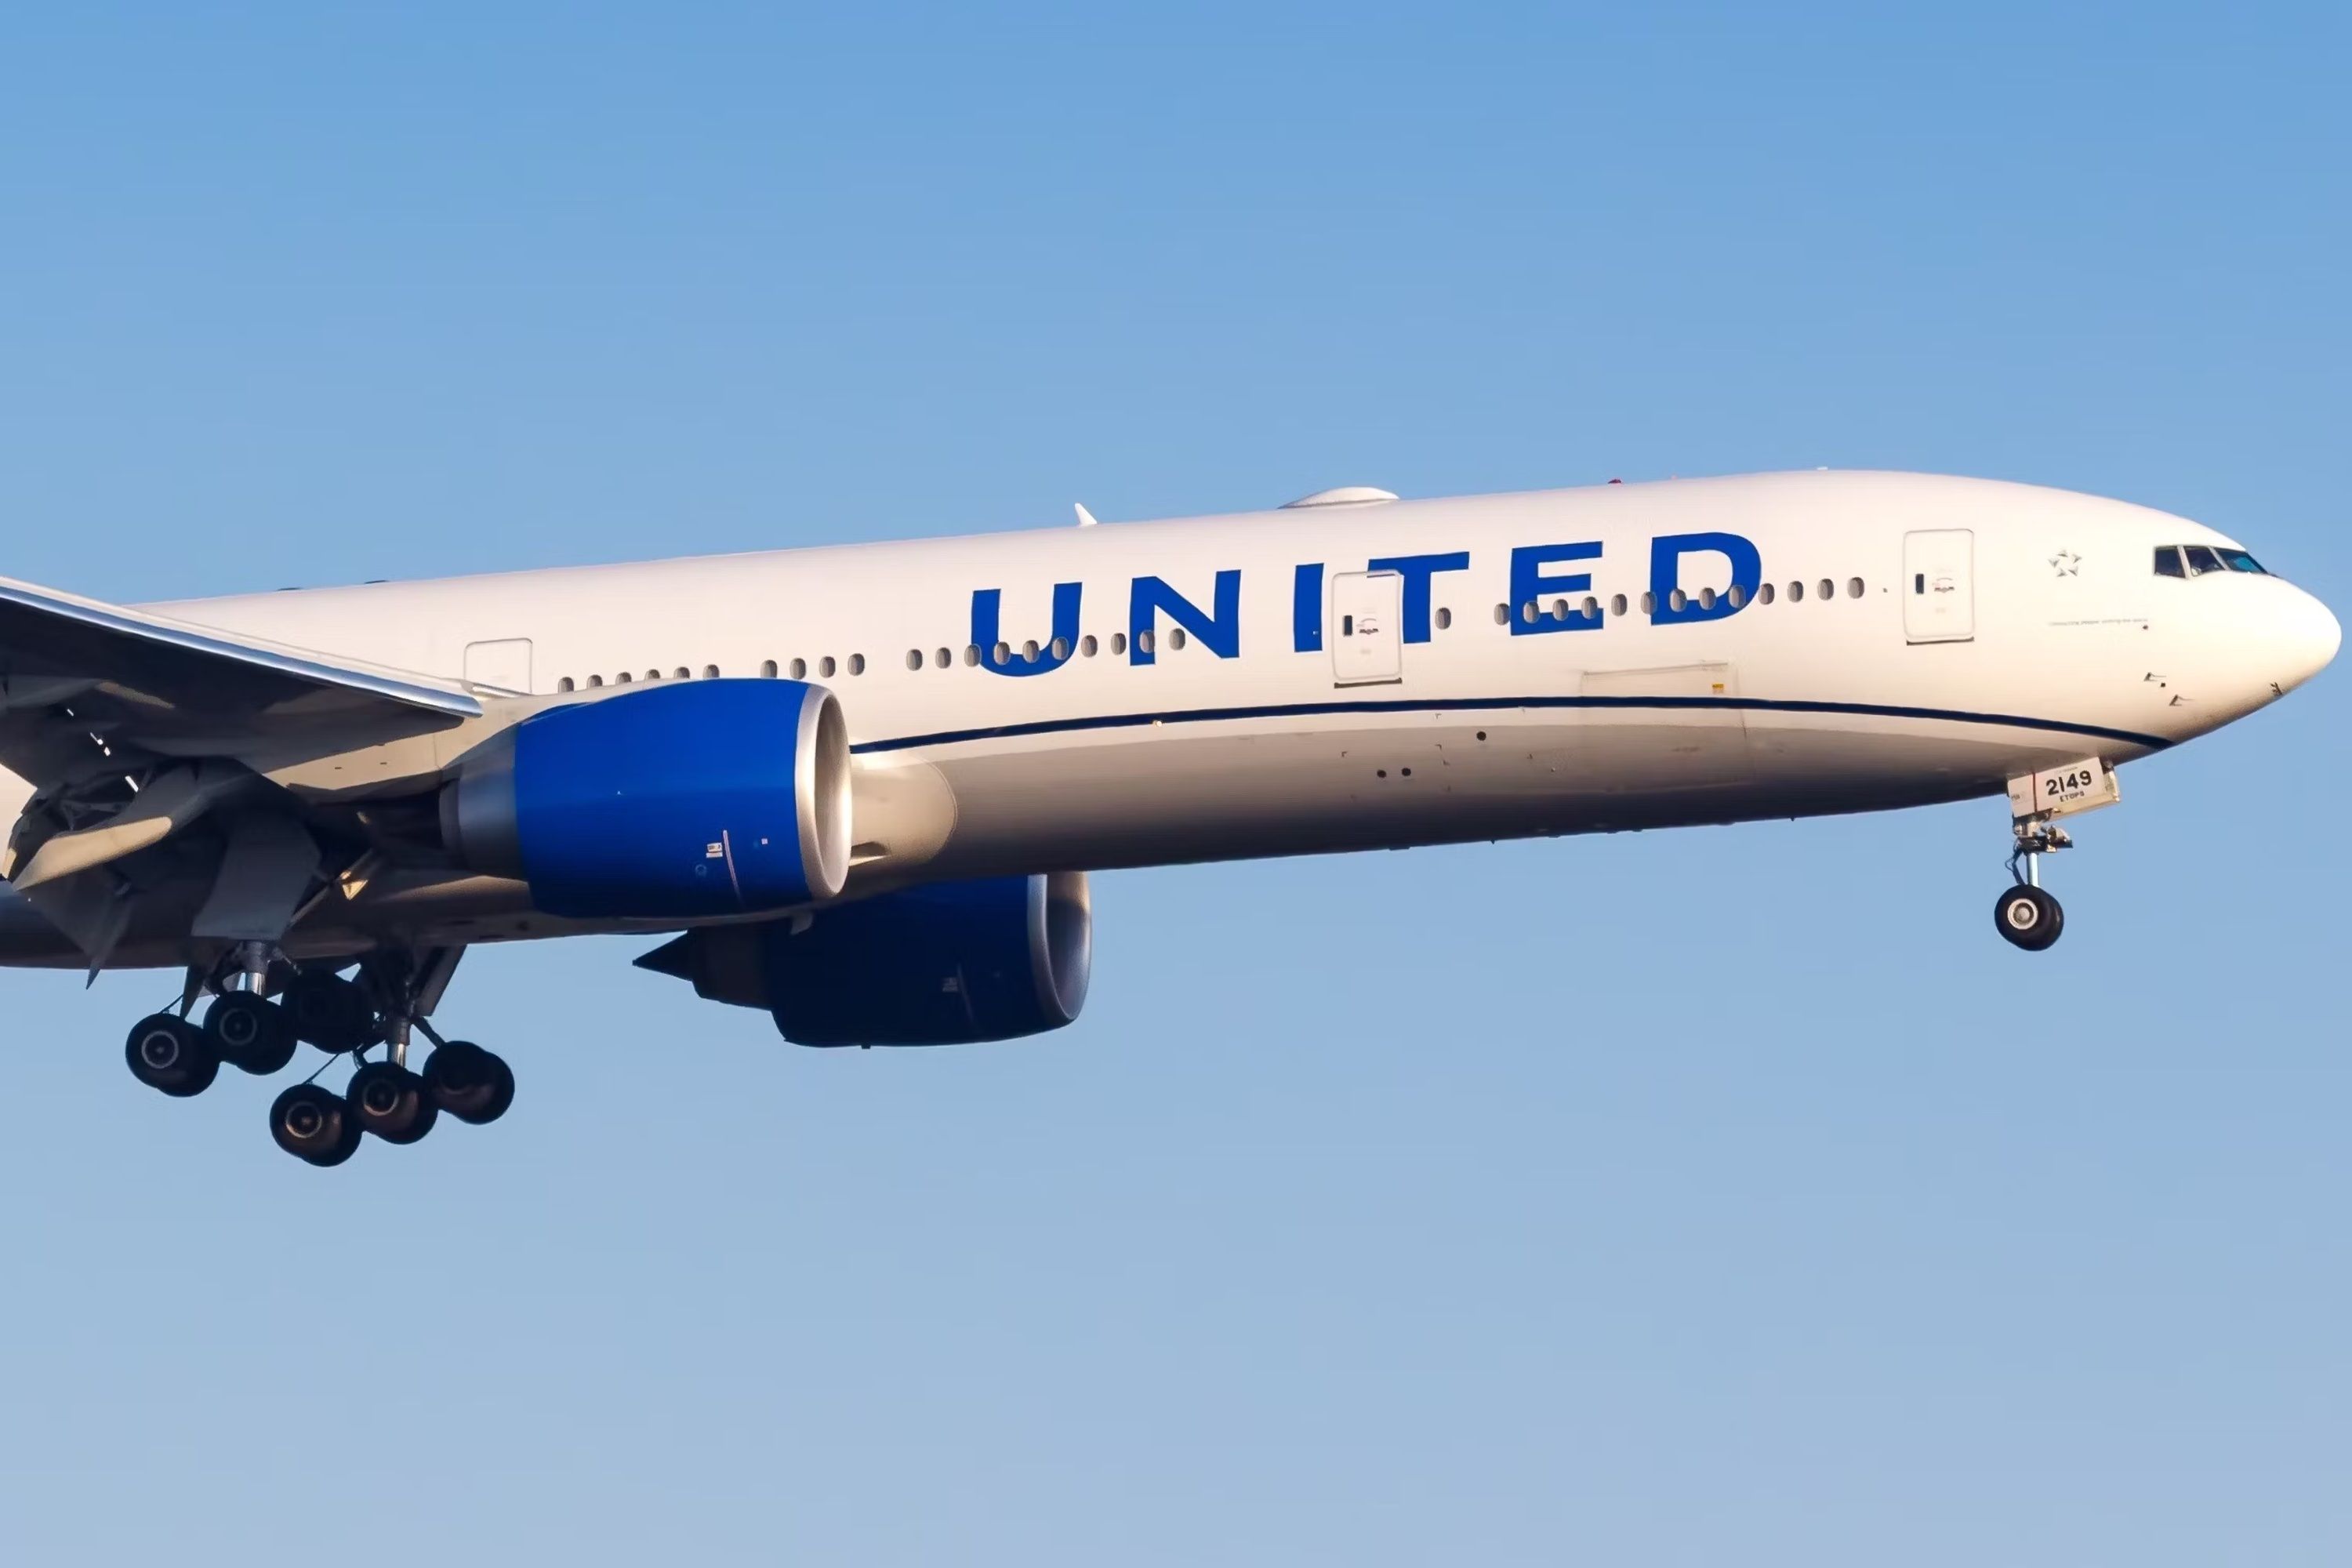 A United Airlines Boeing 777-300ER flying in the sky.